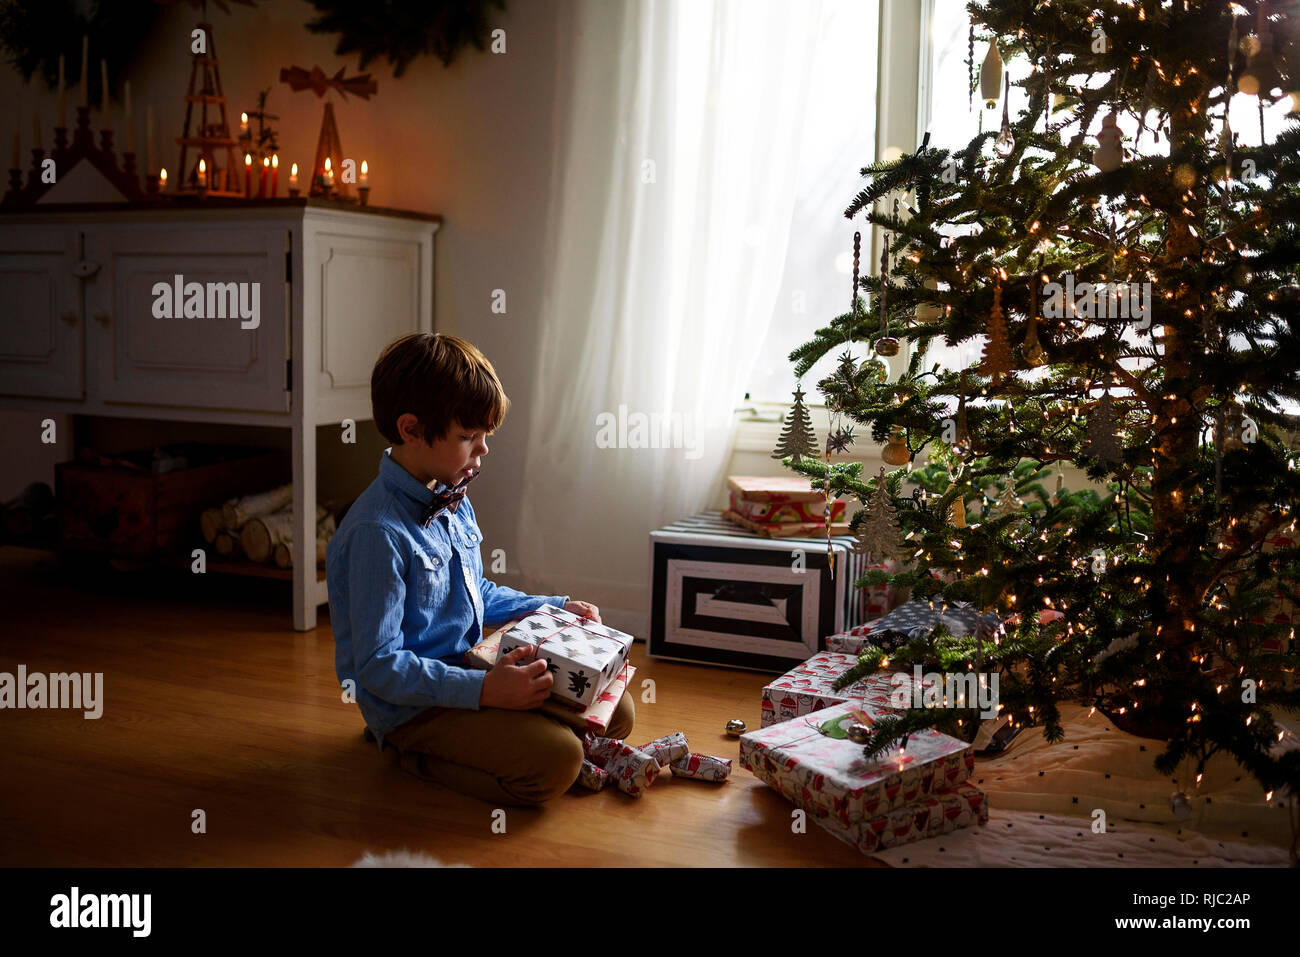 Boy sitting in front of a Christmas tree looking at gifts Stock Photo